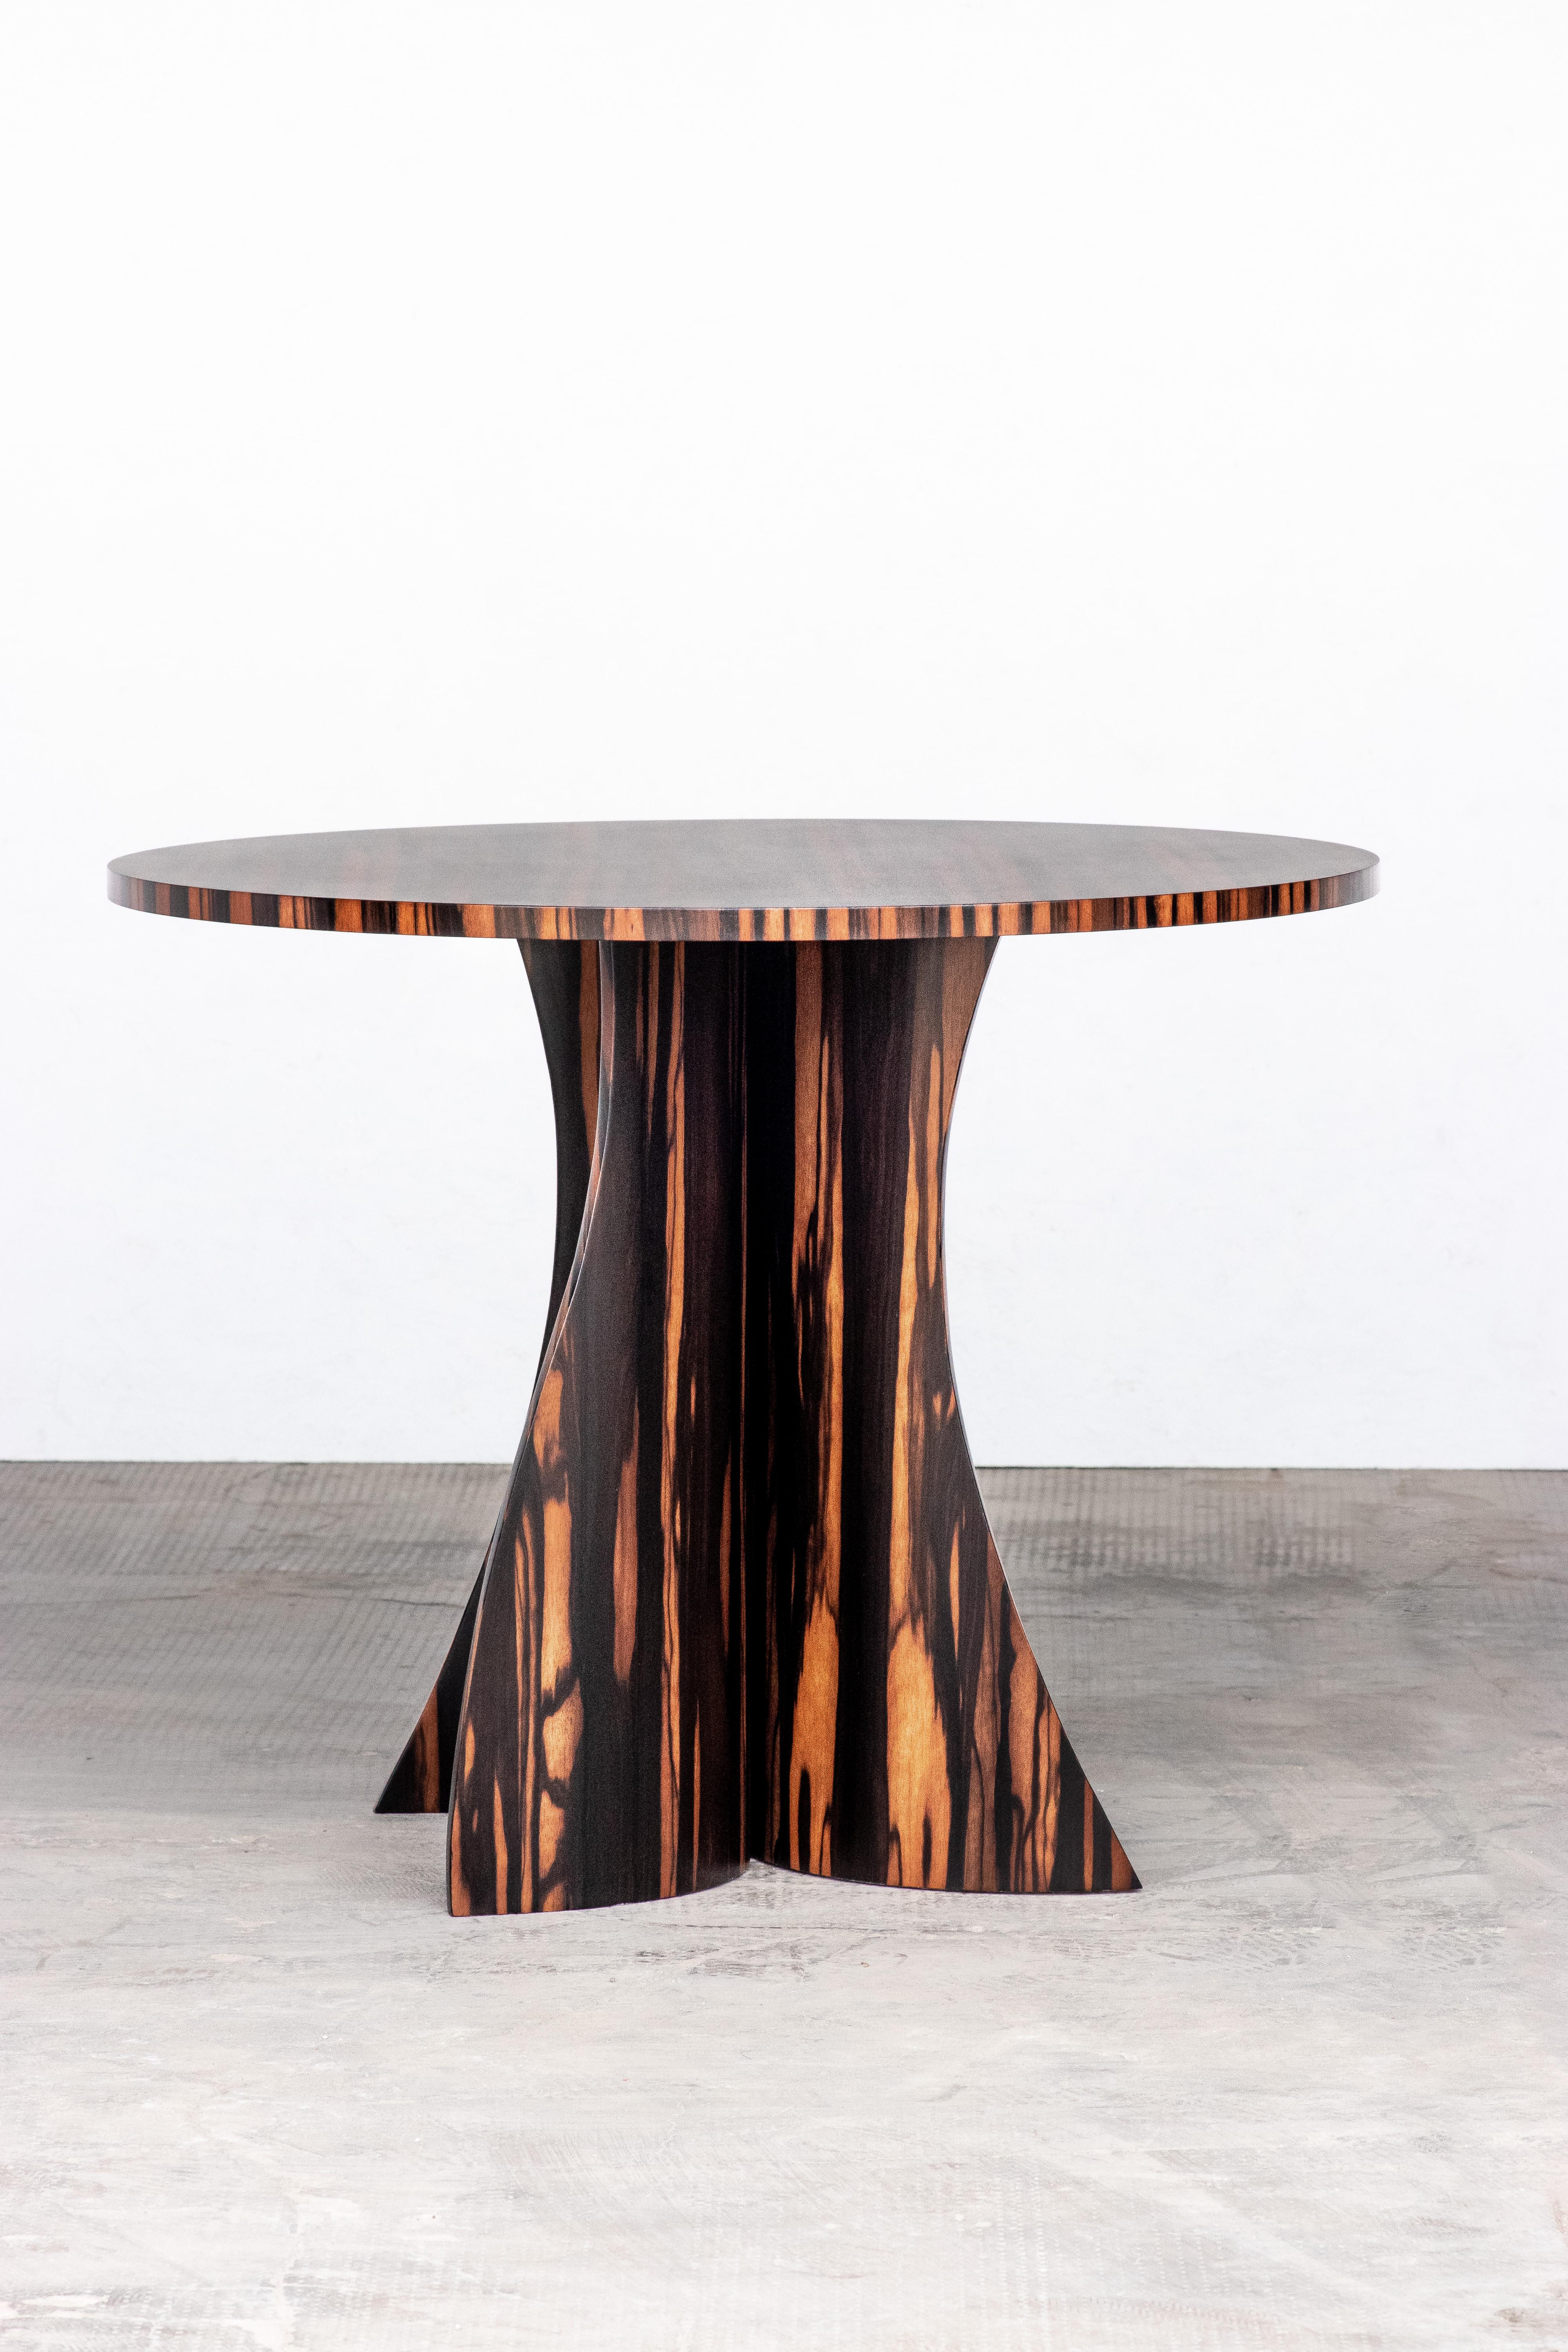 Argentine Modern Round Side Table in Macassar Ebony from Costantini, Andino - In Stock  For Sale